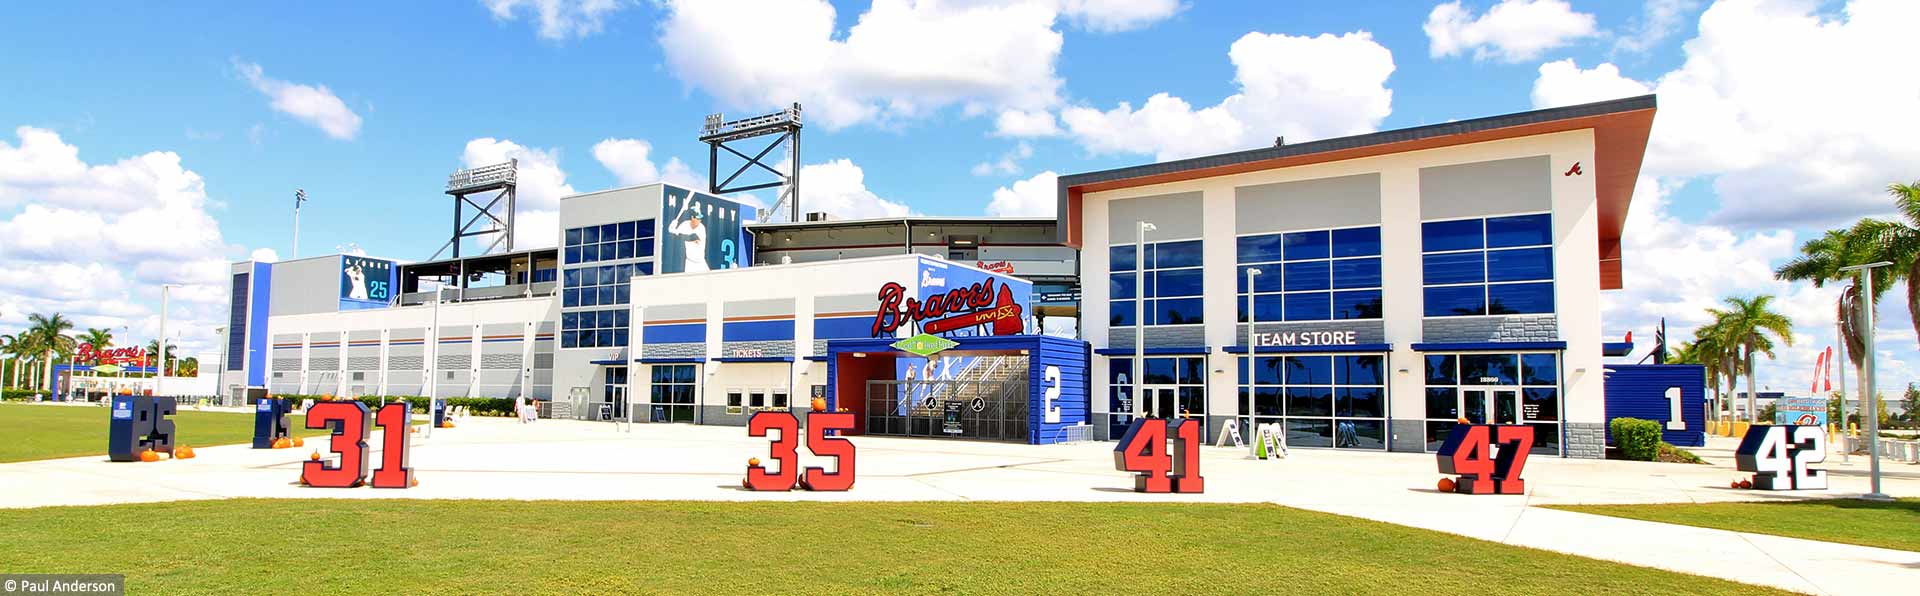 Florida baseball stadium with large red numbers